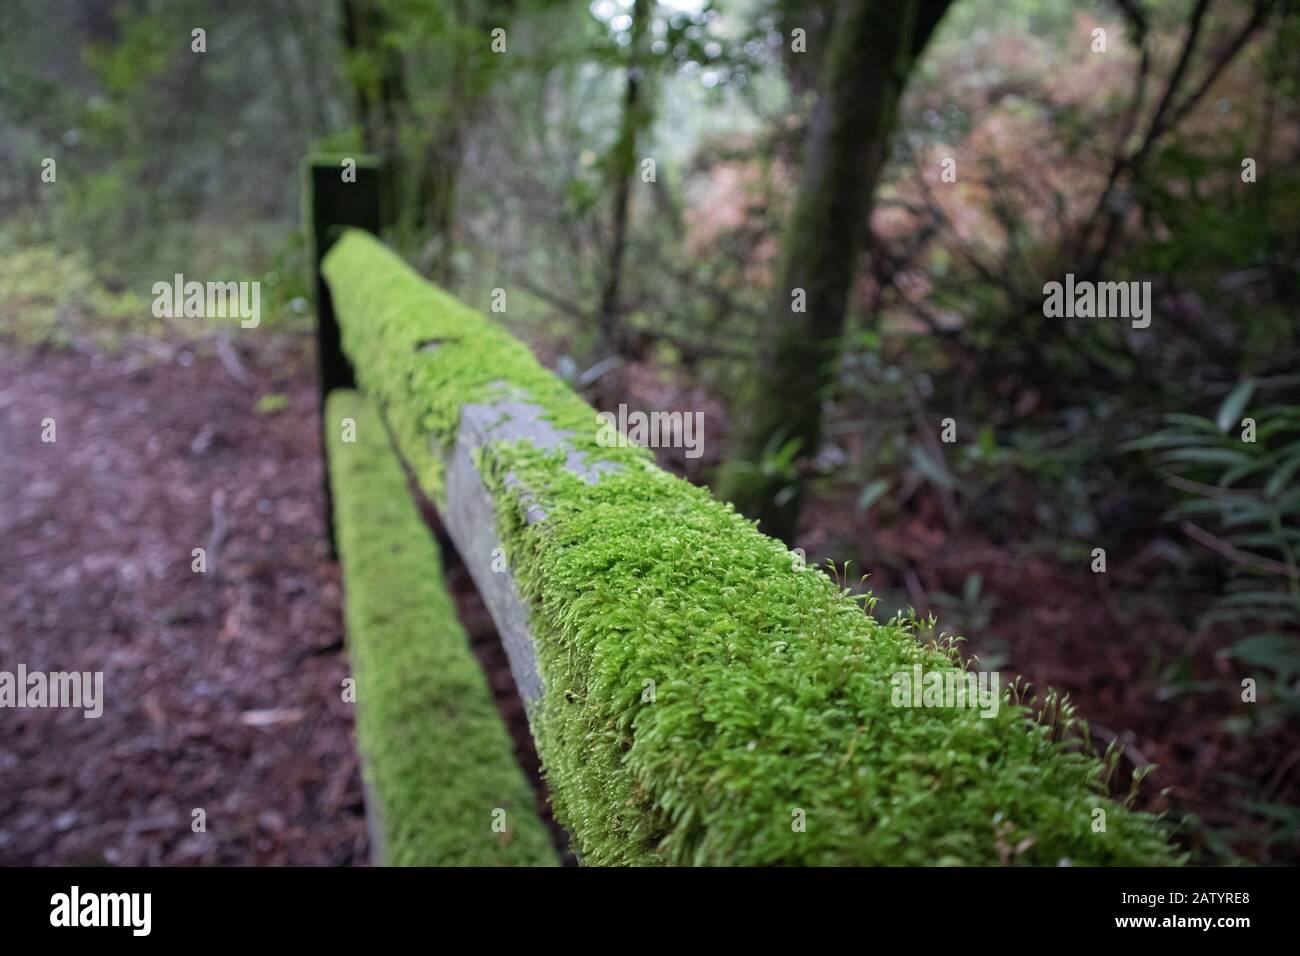 Moss on an old wooden fence. Stock Photo